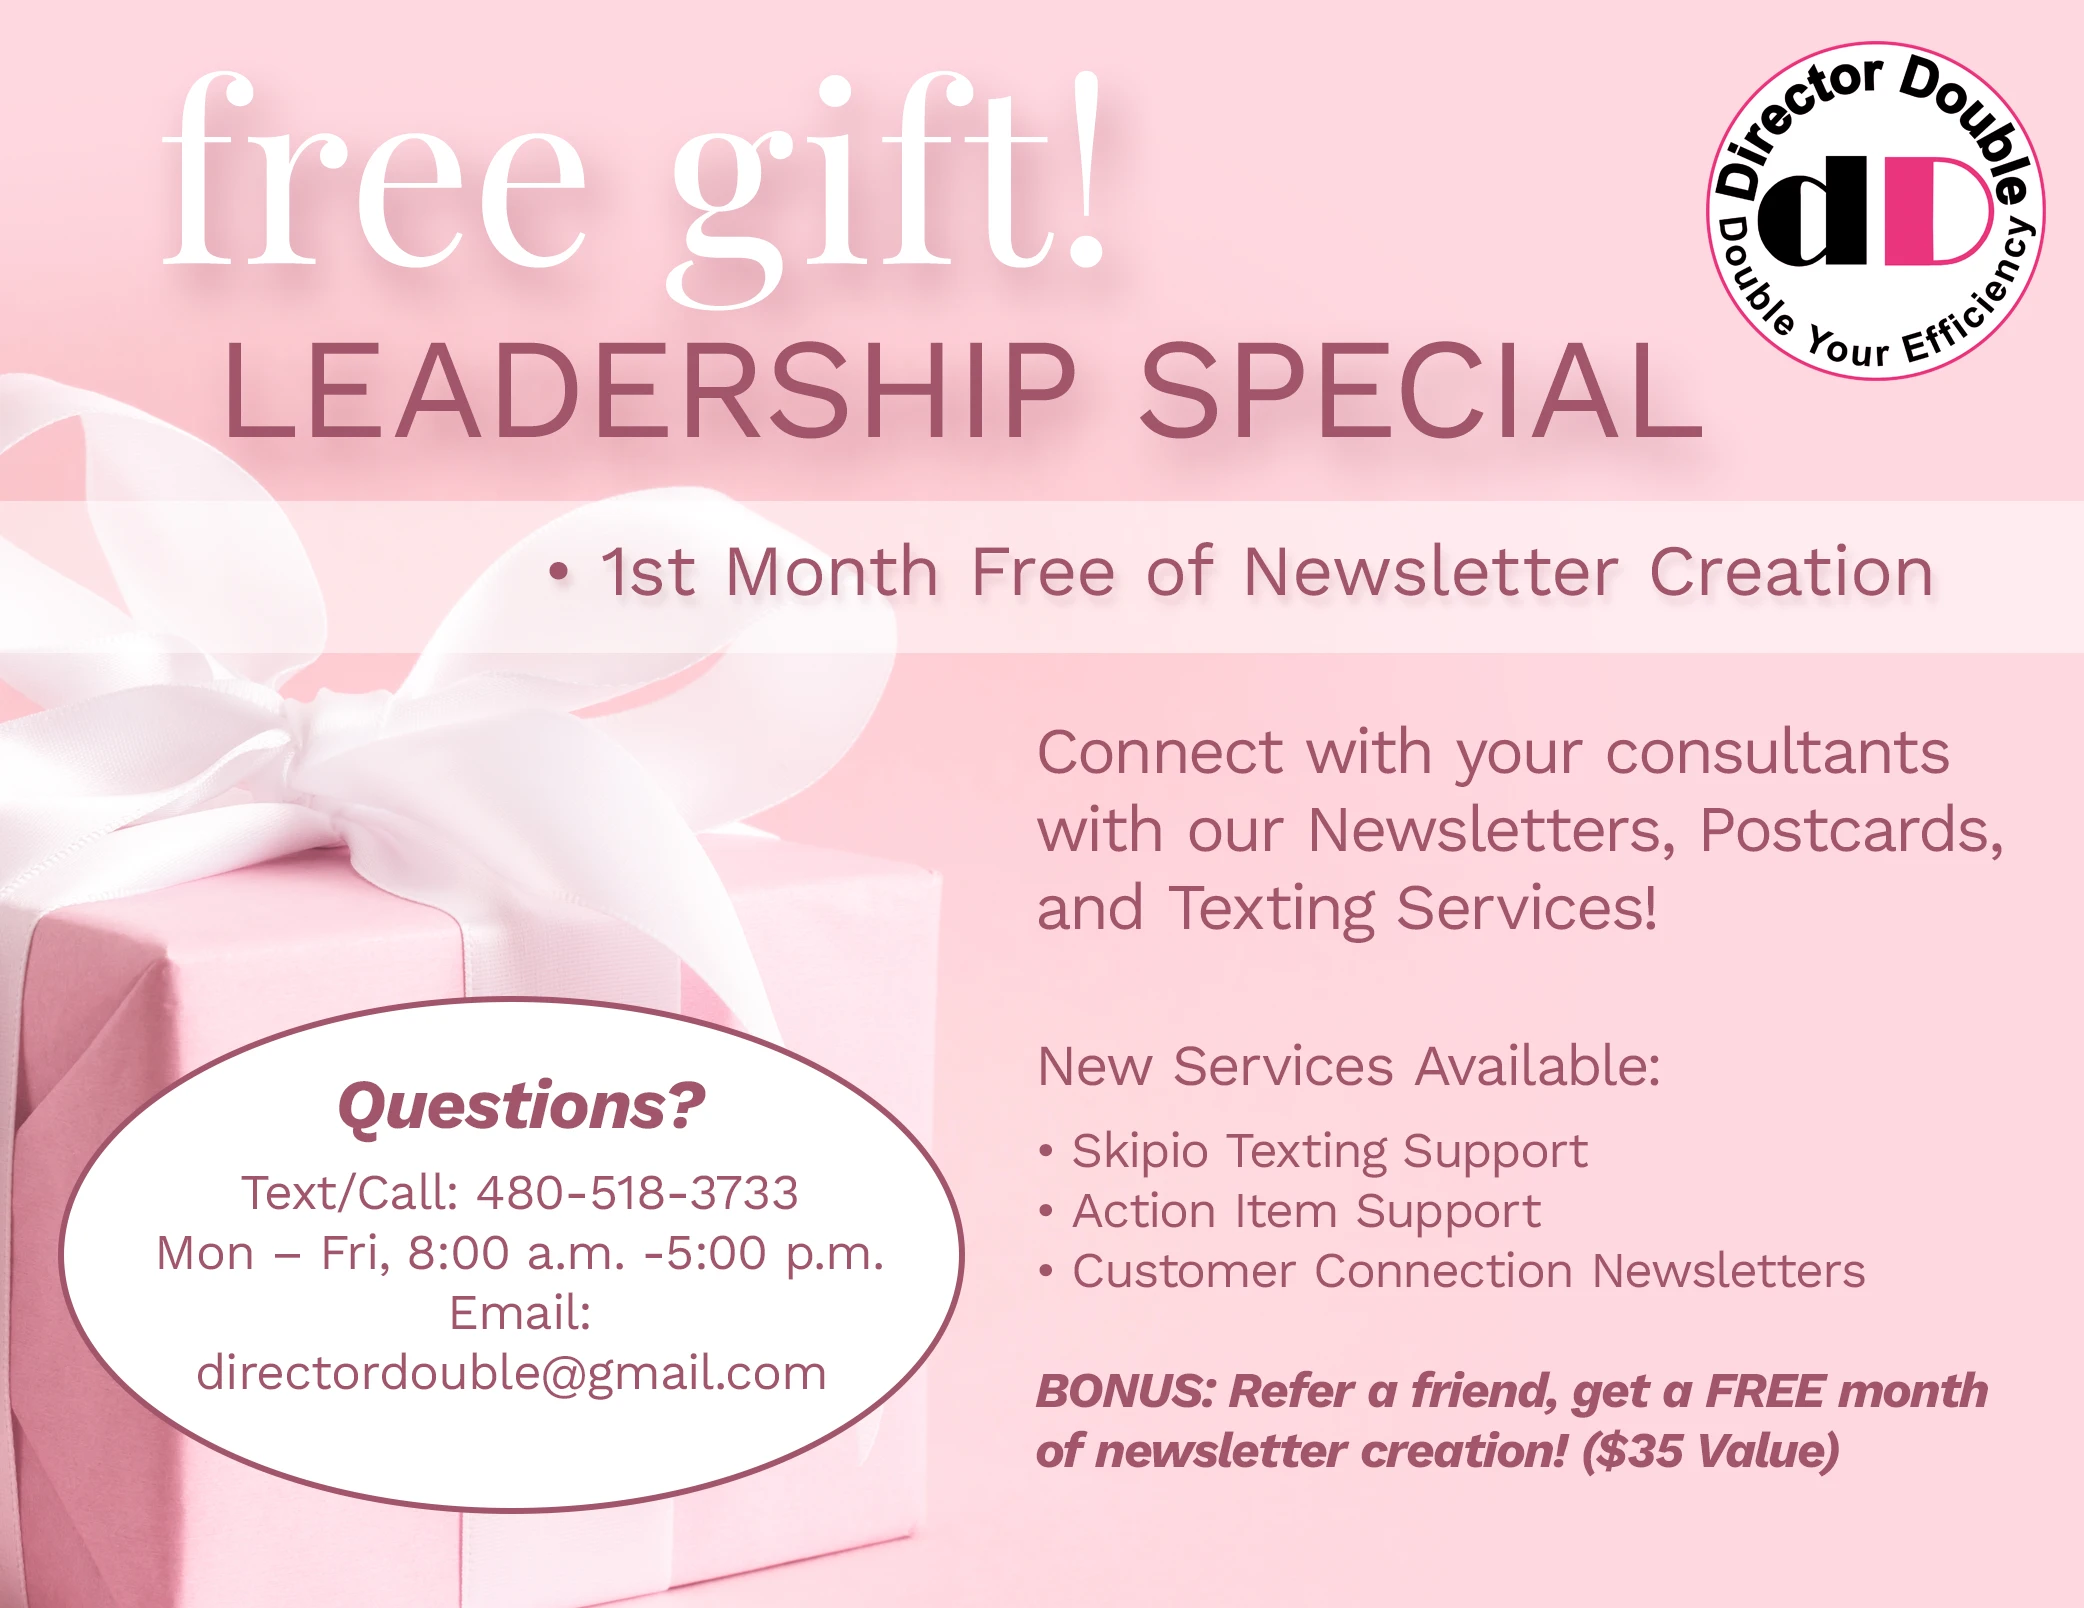 DirectorDouble.com Leadership Special first month of newsletter creation FREE plus new services